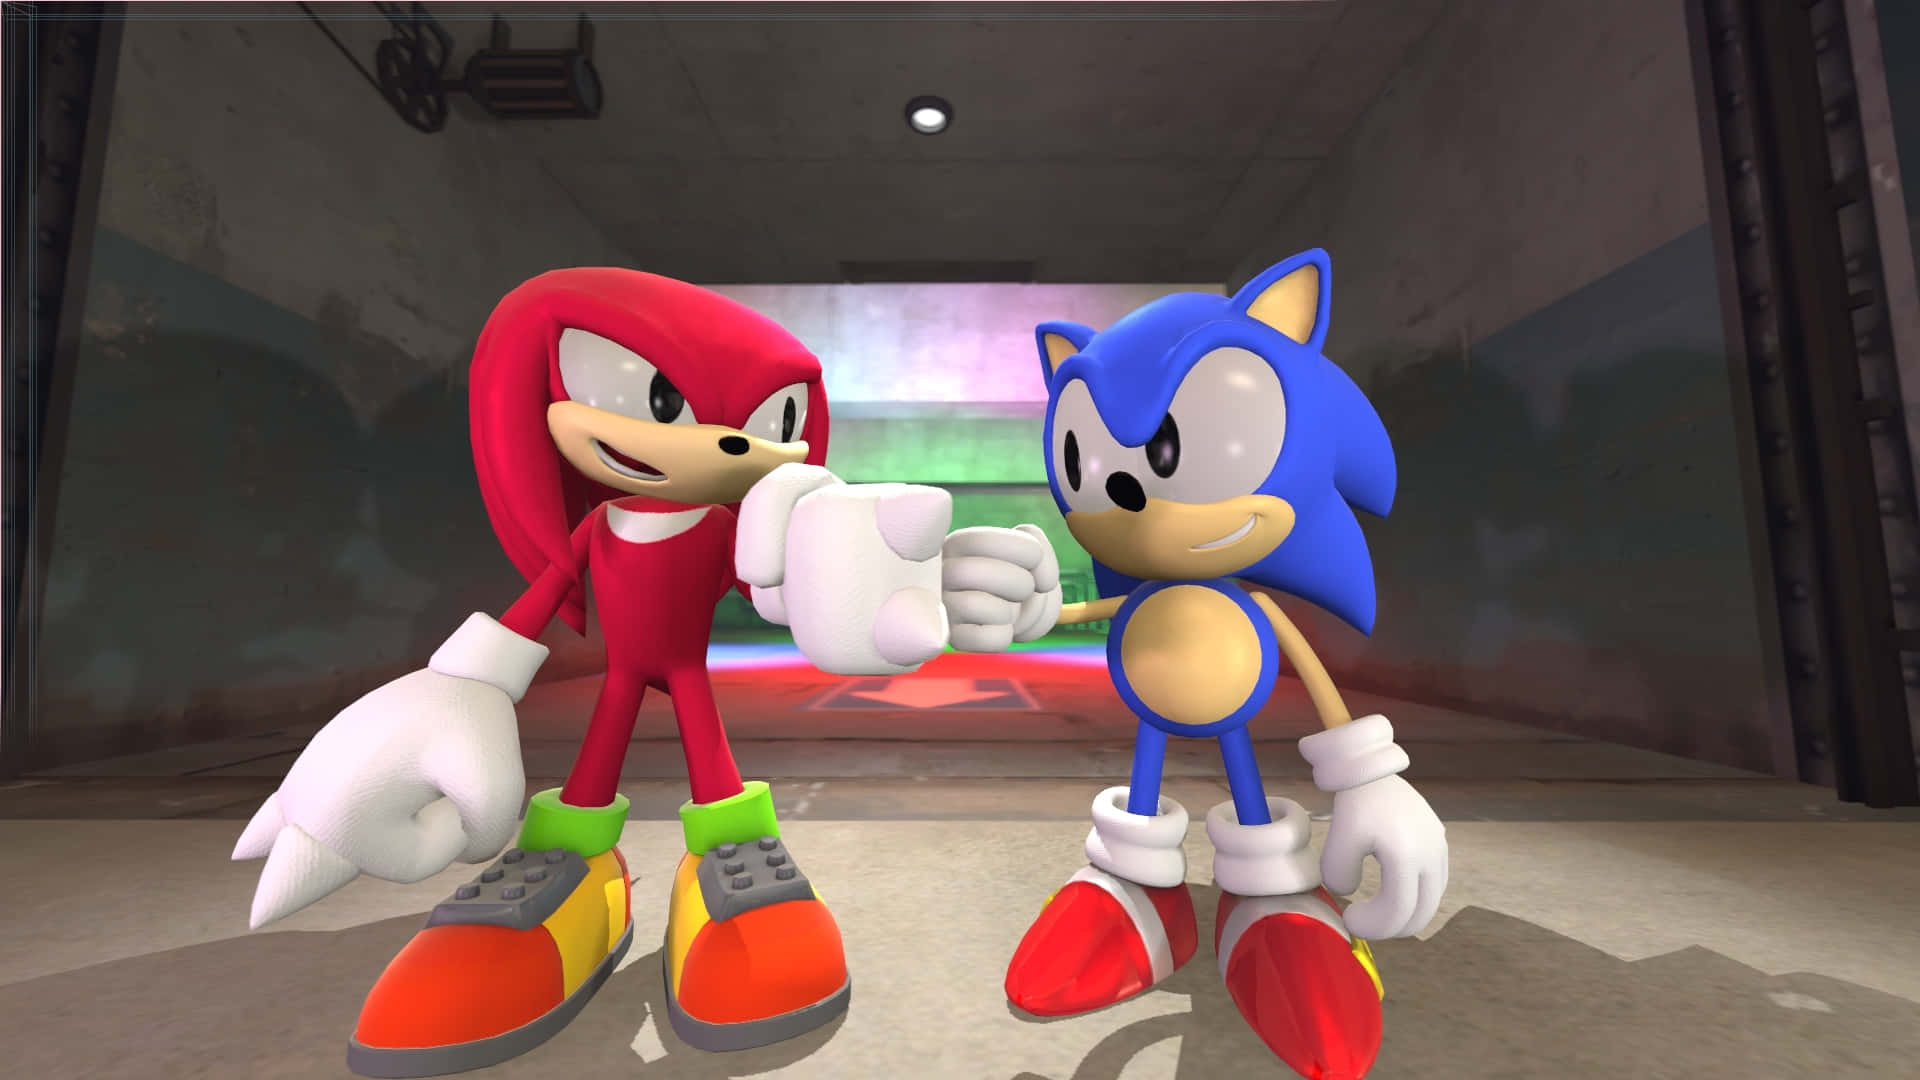 The iconic duo, Sonic and Knuckles, in action Wallpaper